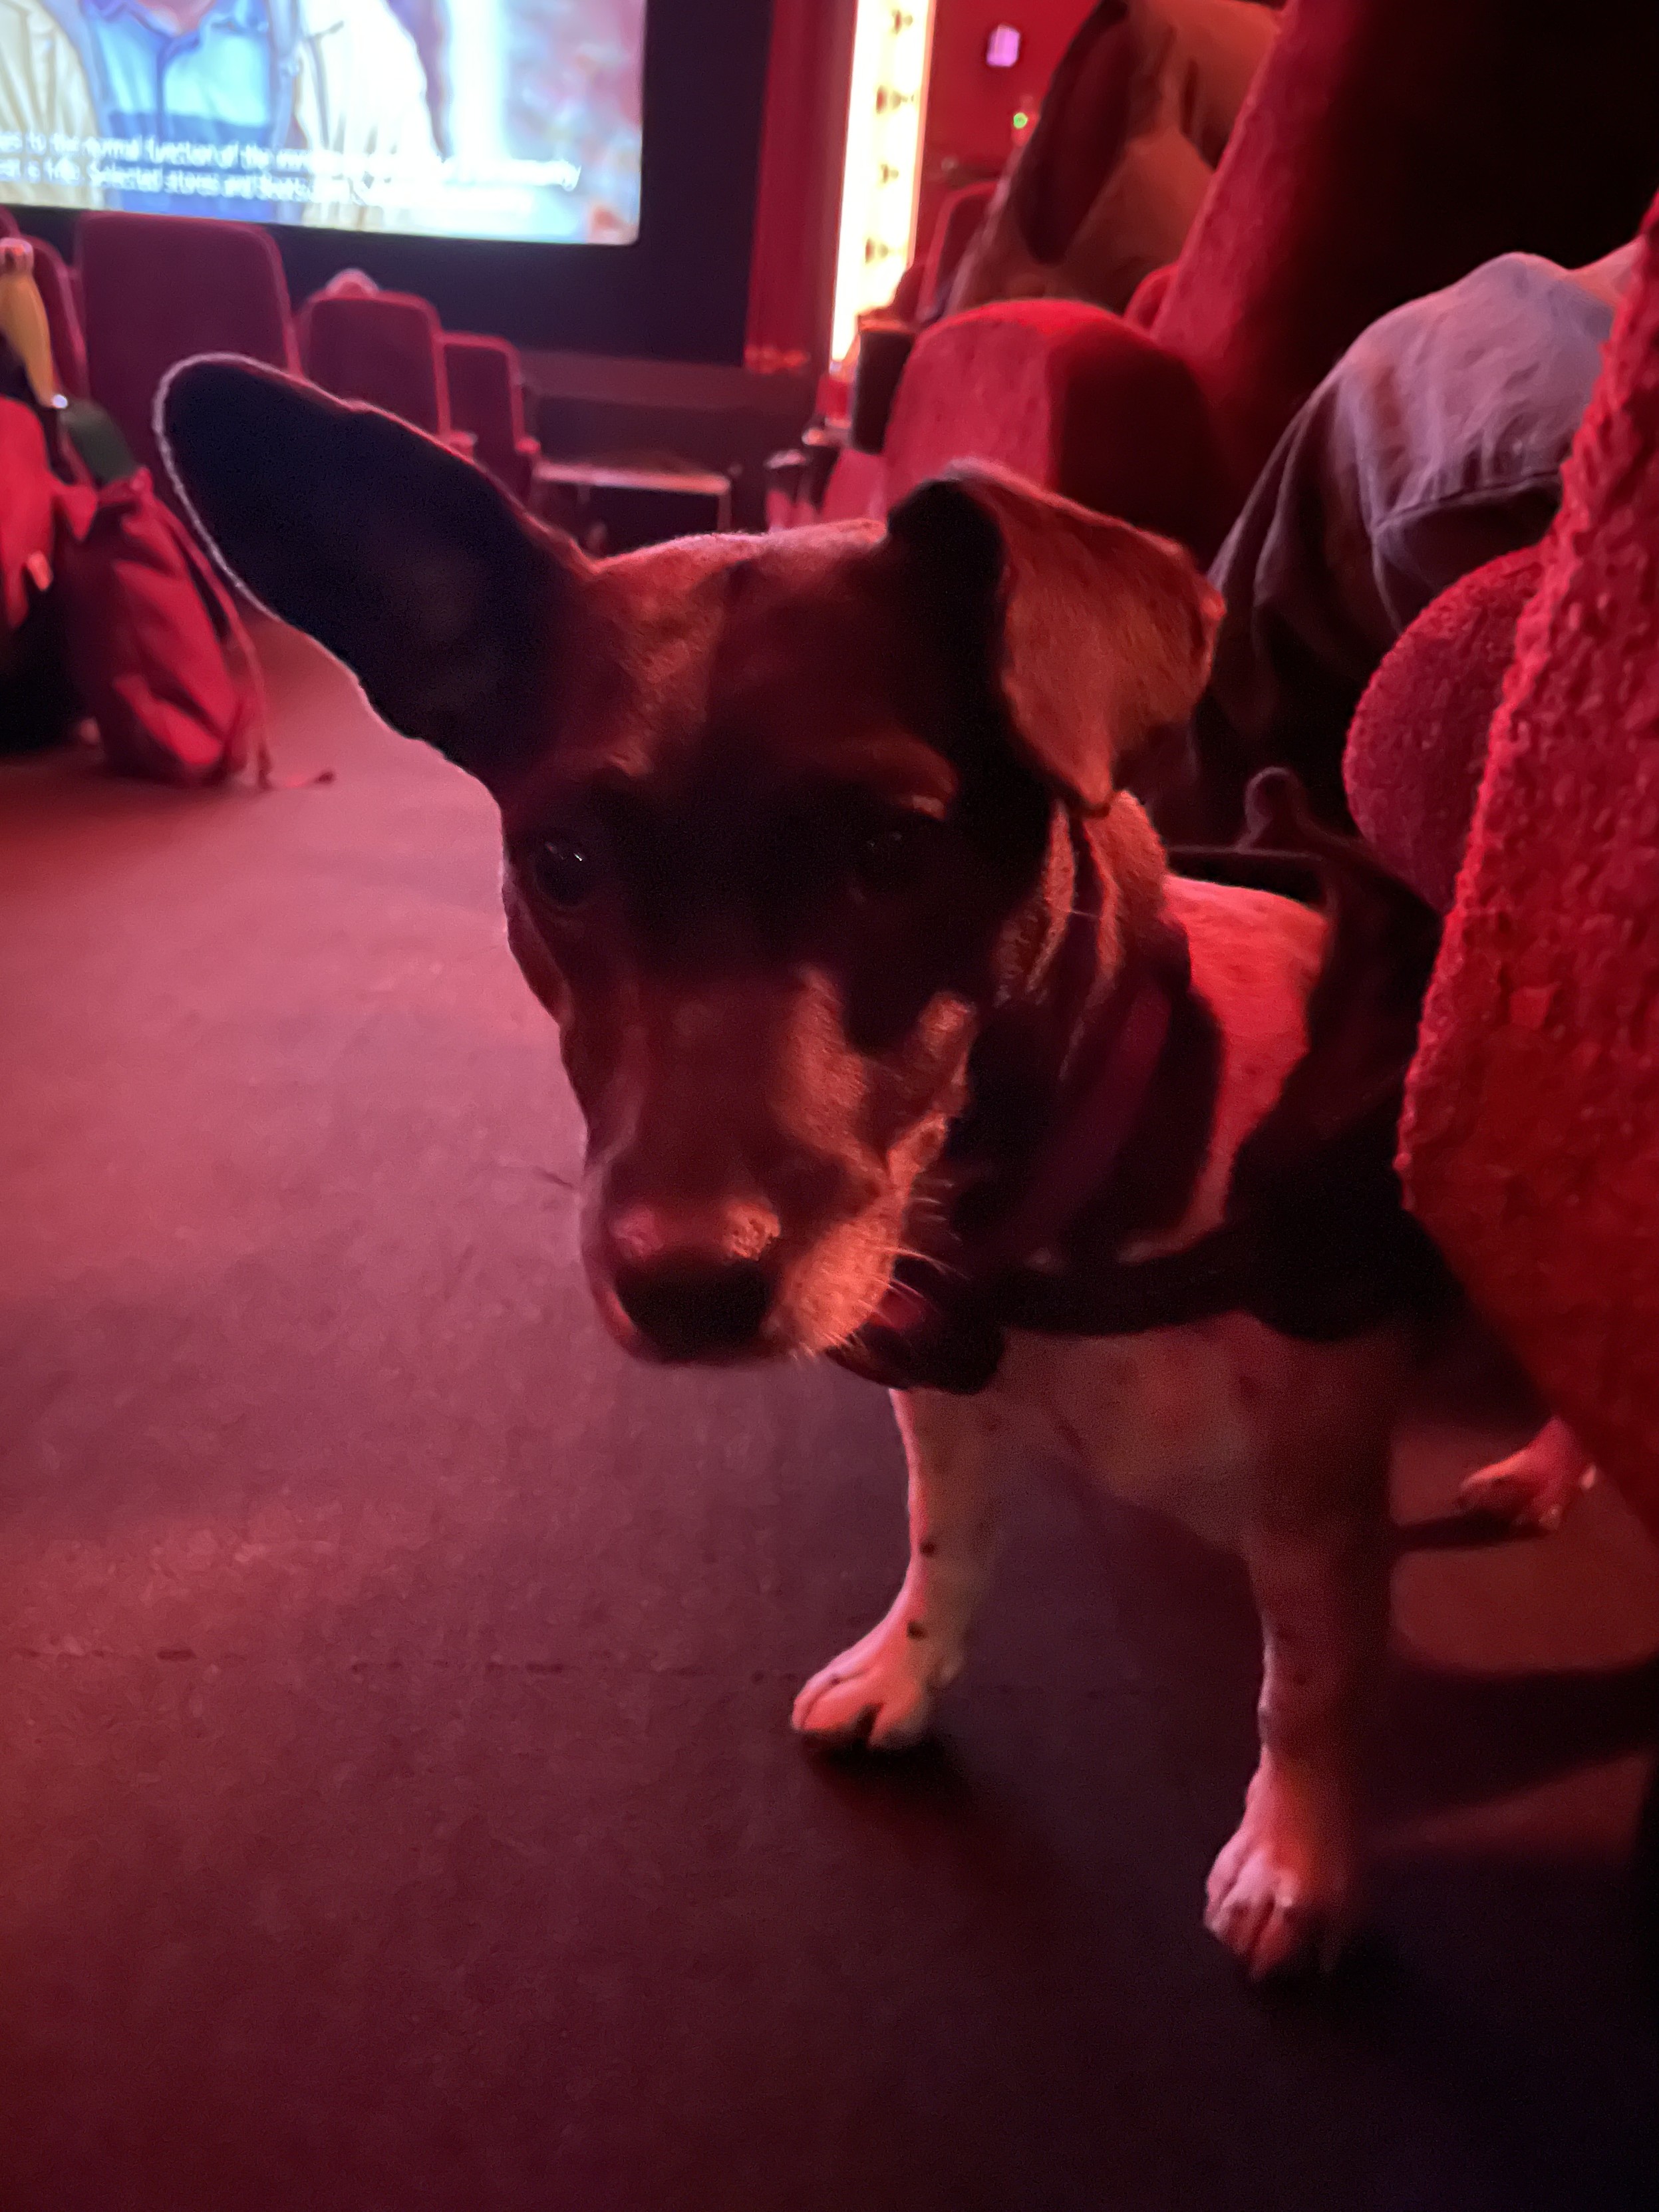 A small terrier stepping into the isle of the cinema. You can see a bit of the big screen. Everything is bathed in red light.